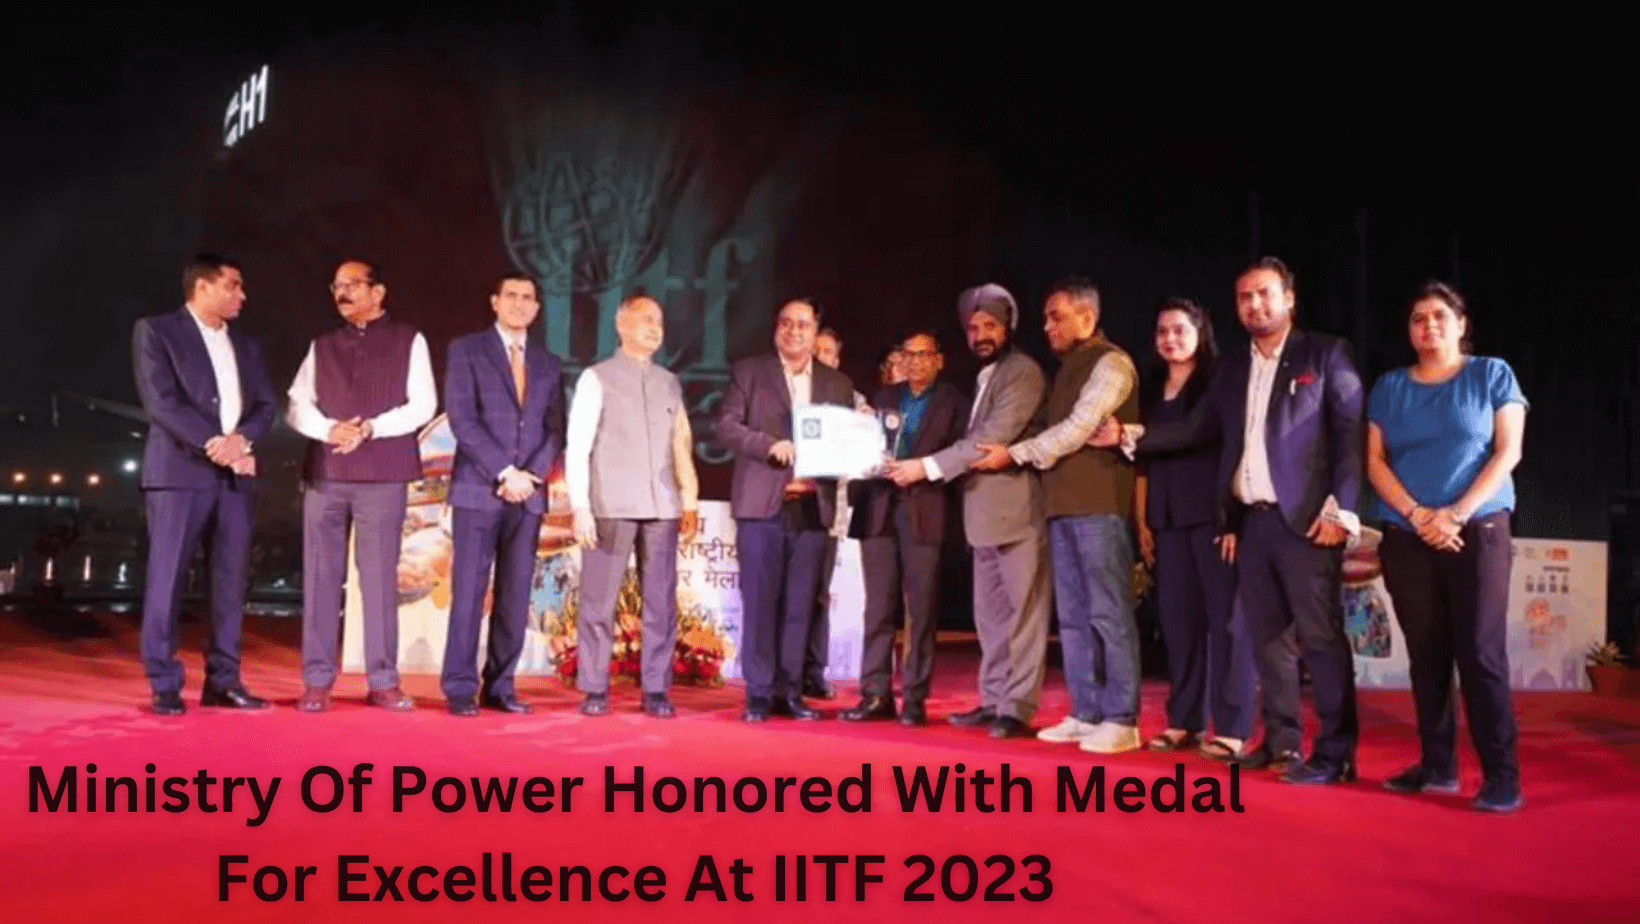 Ministry Of Power Honored With Medal For Excellence At IITF 2023